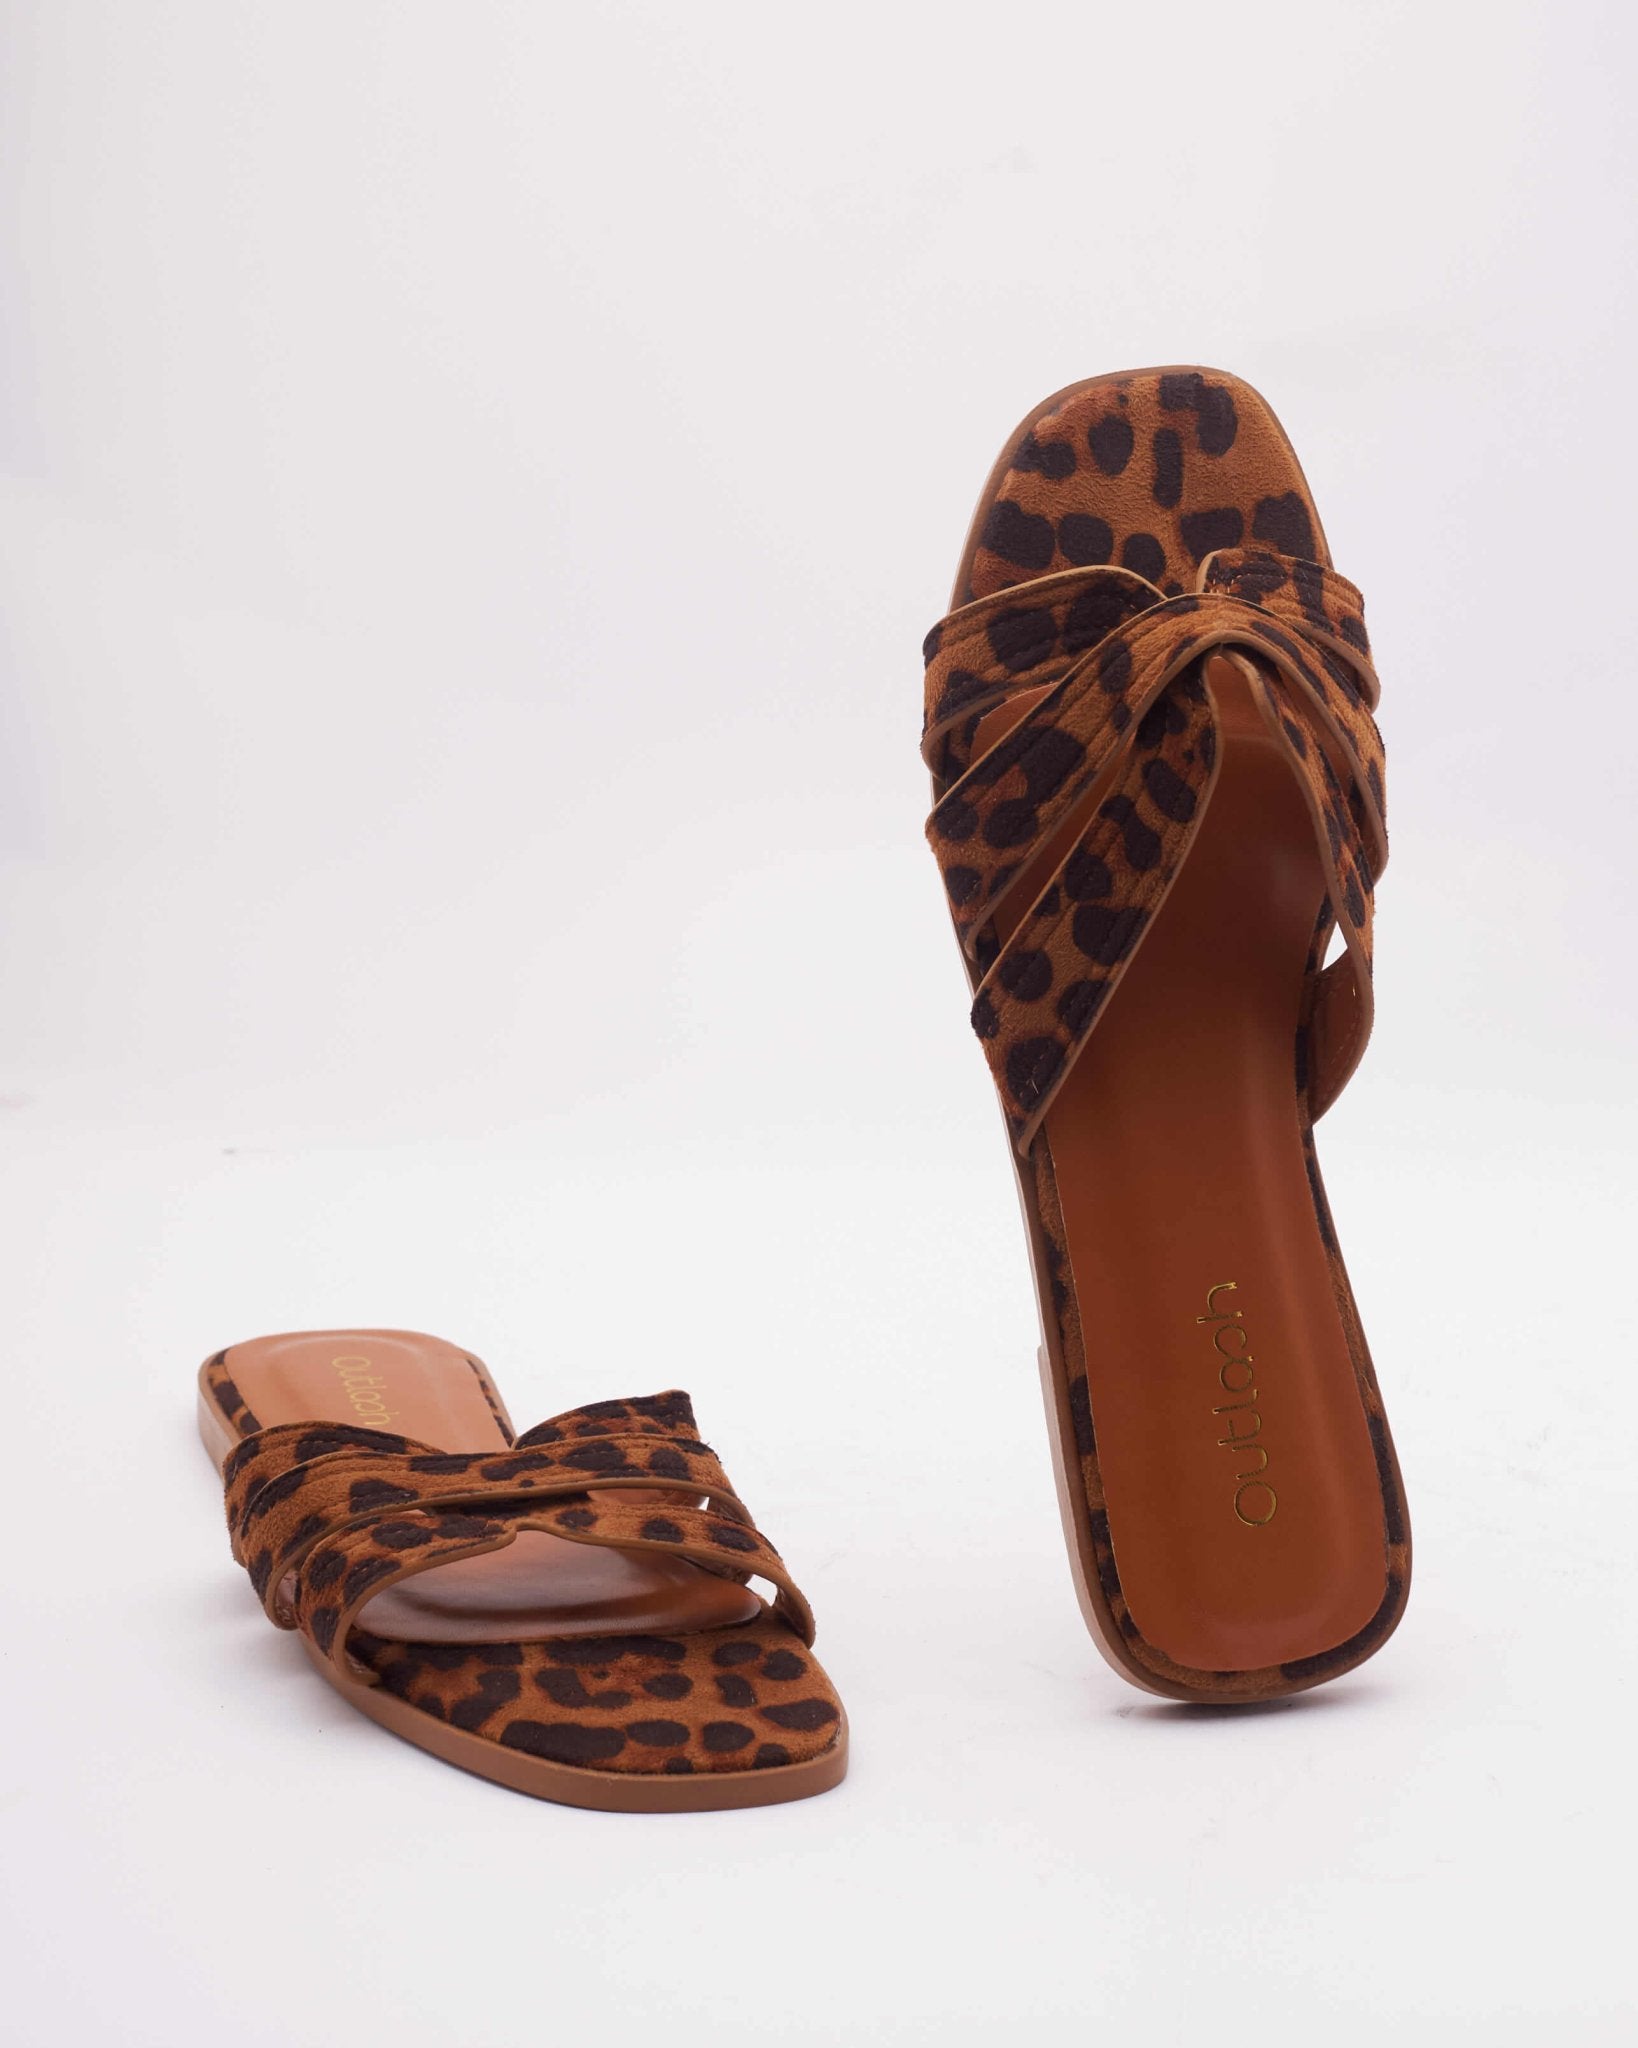 Chic Leather Slides in Leopard - Outlash brand